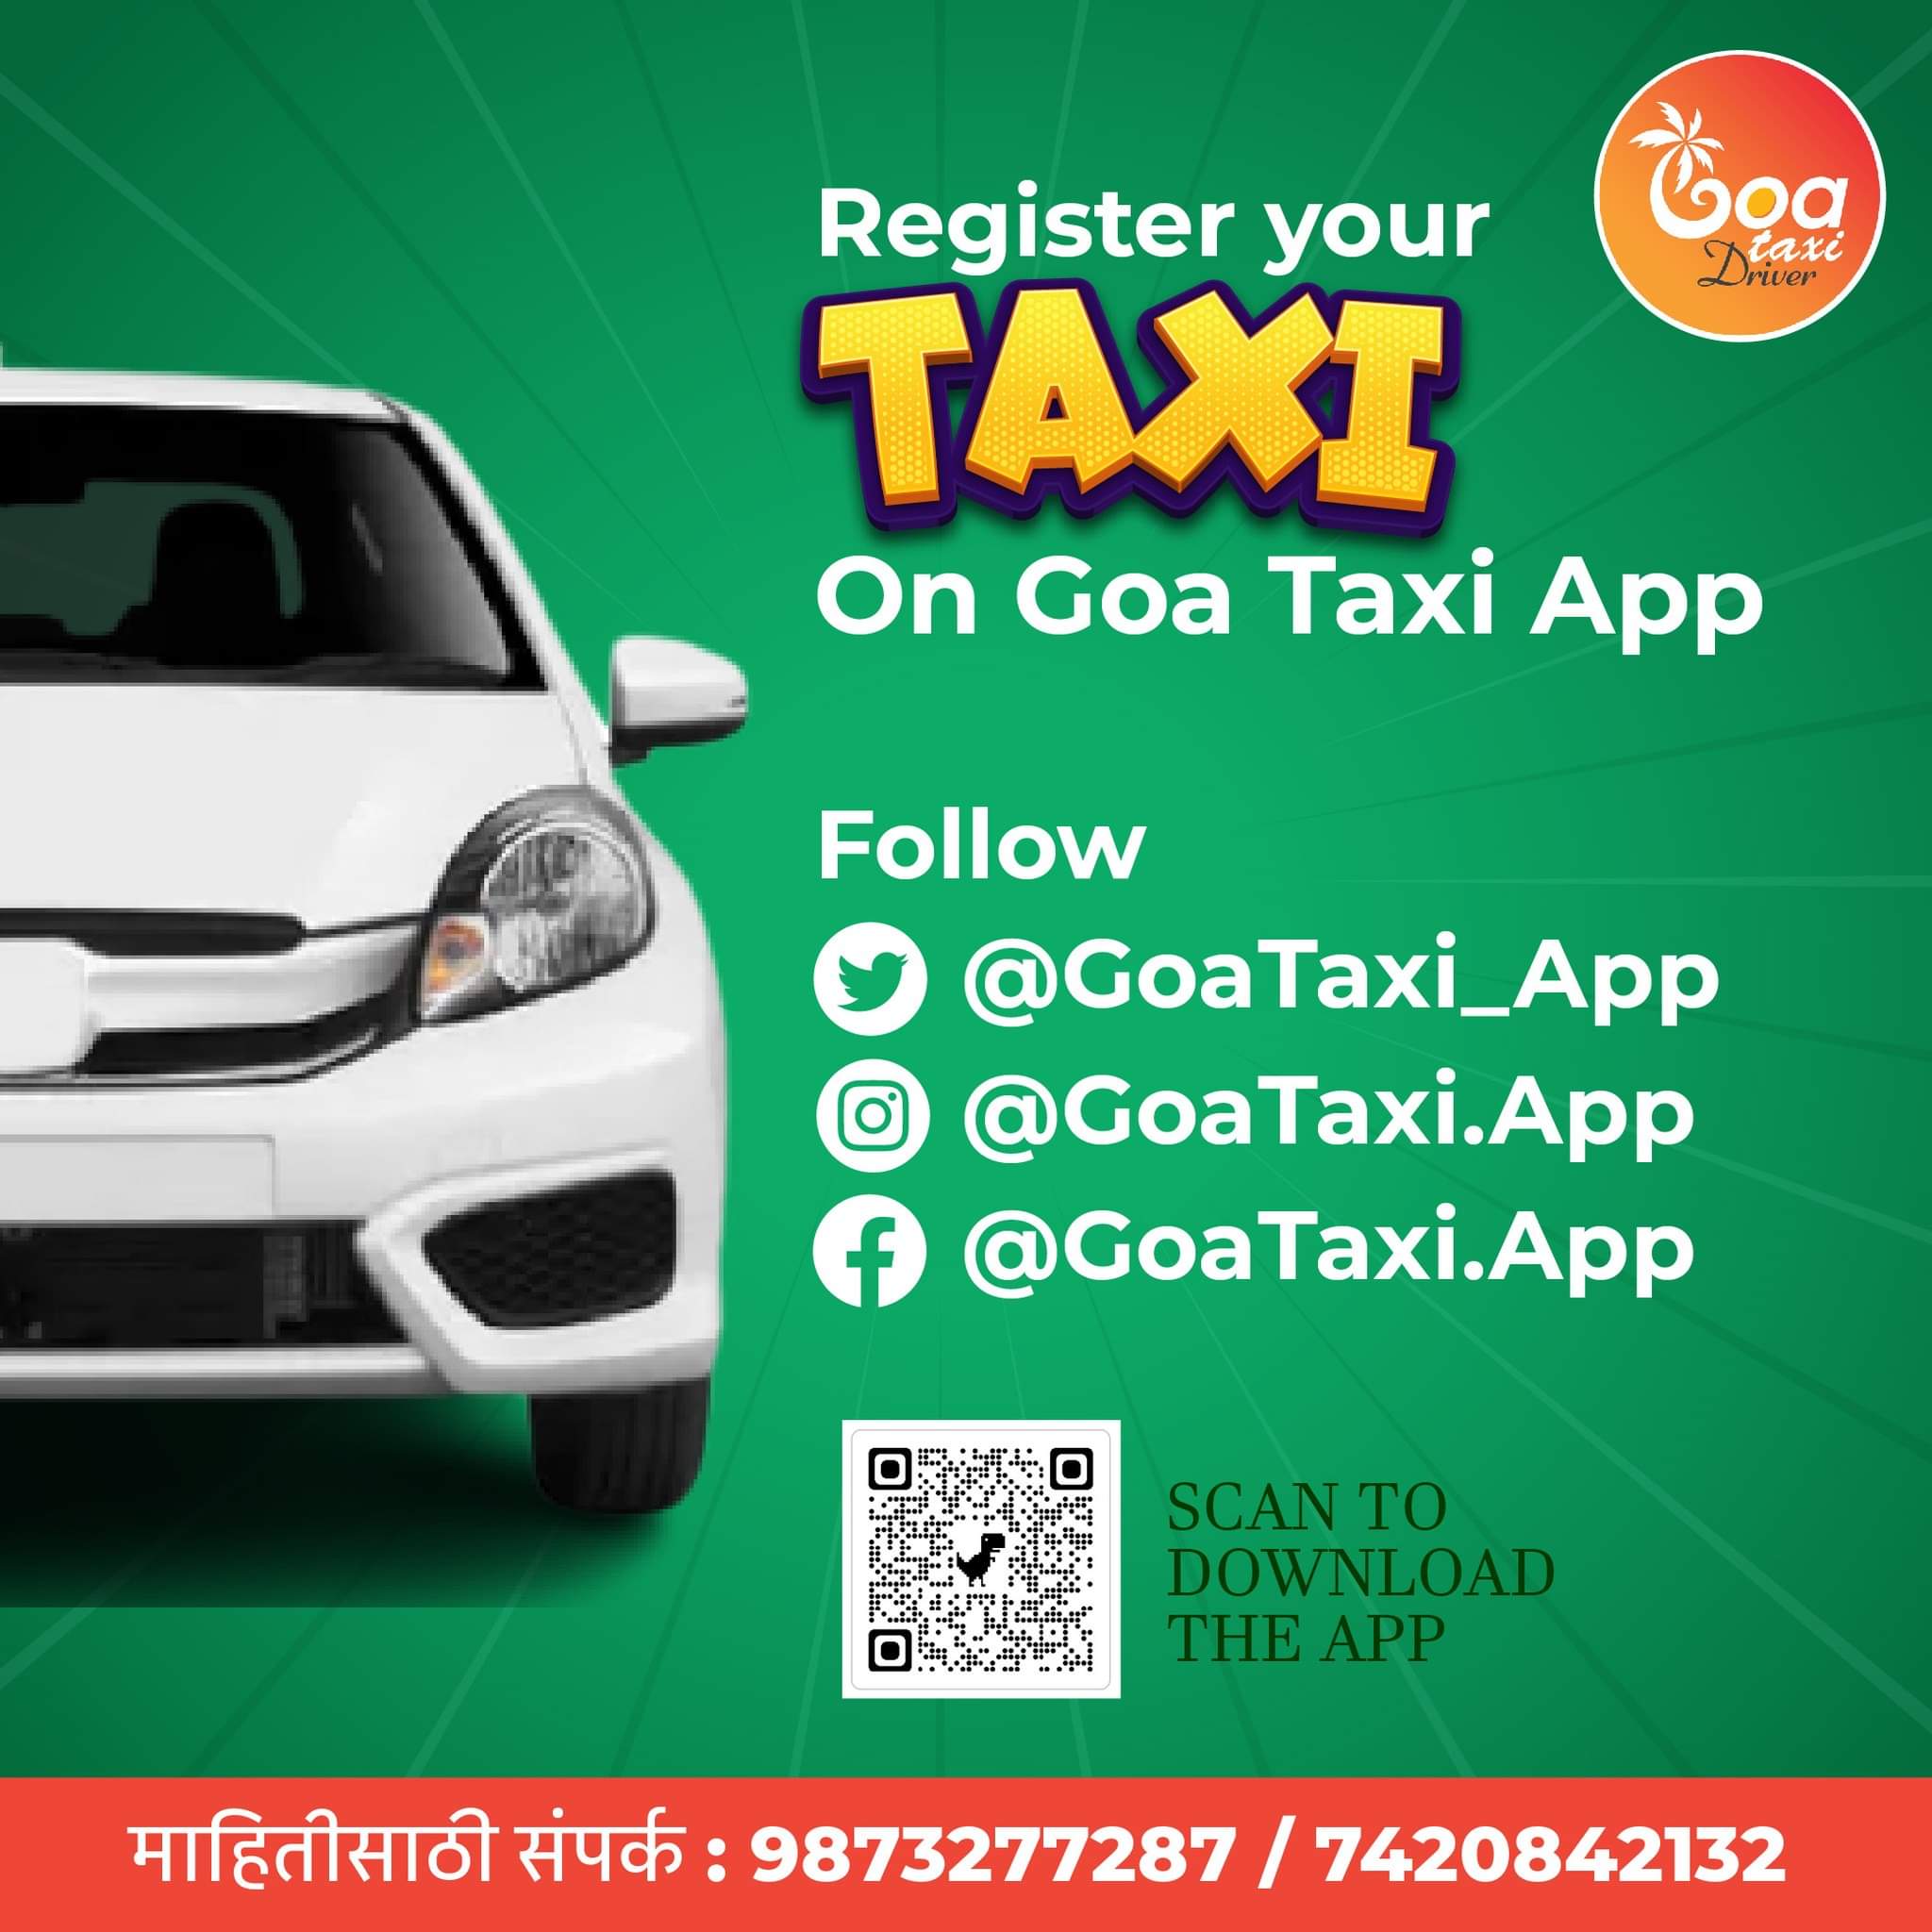 Join GoaTaxi App now to benefit from Government-specified rates!